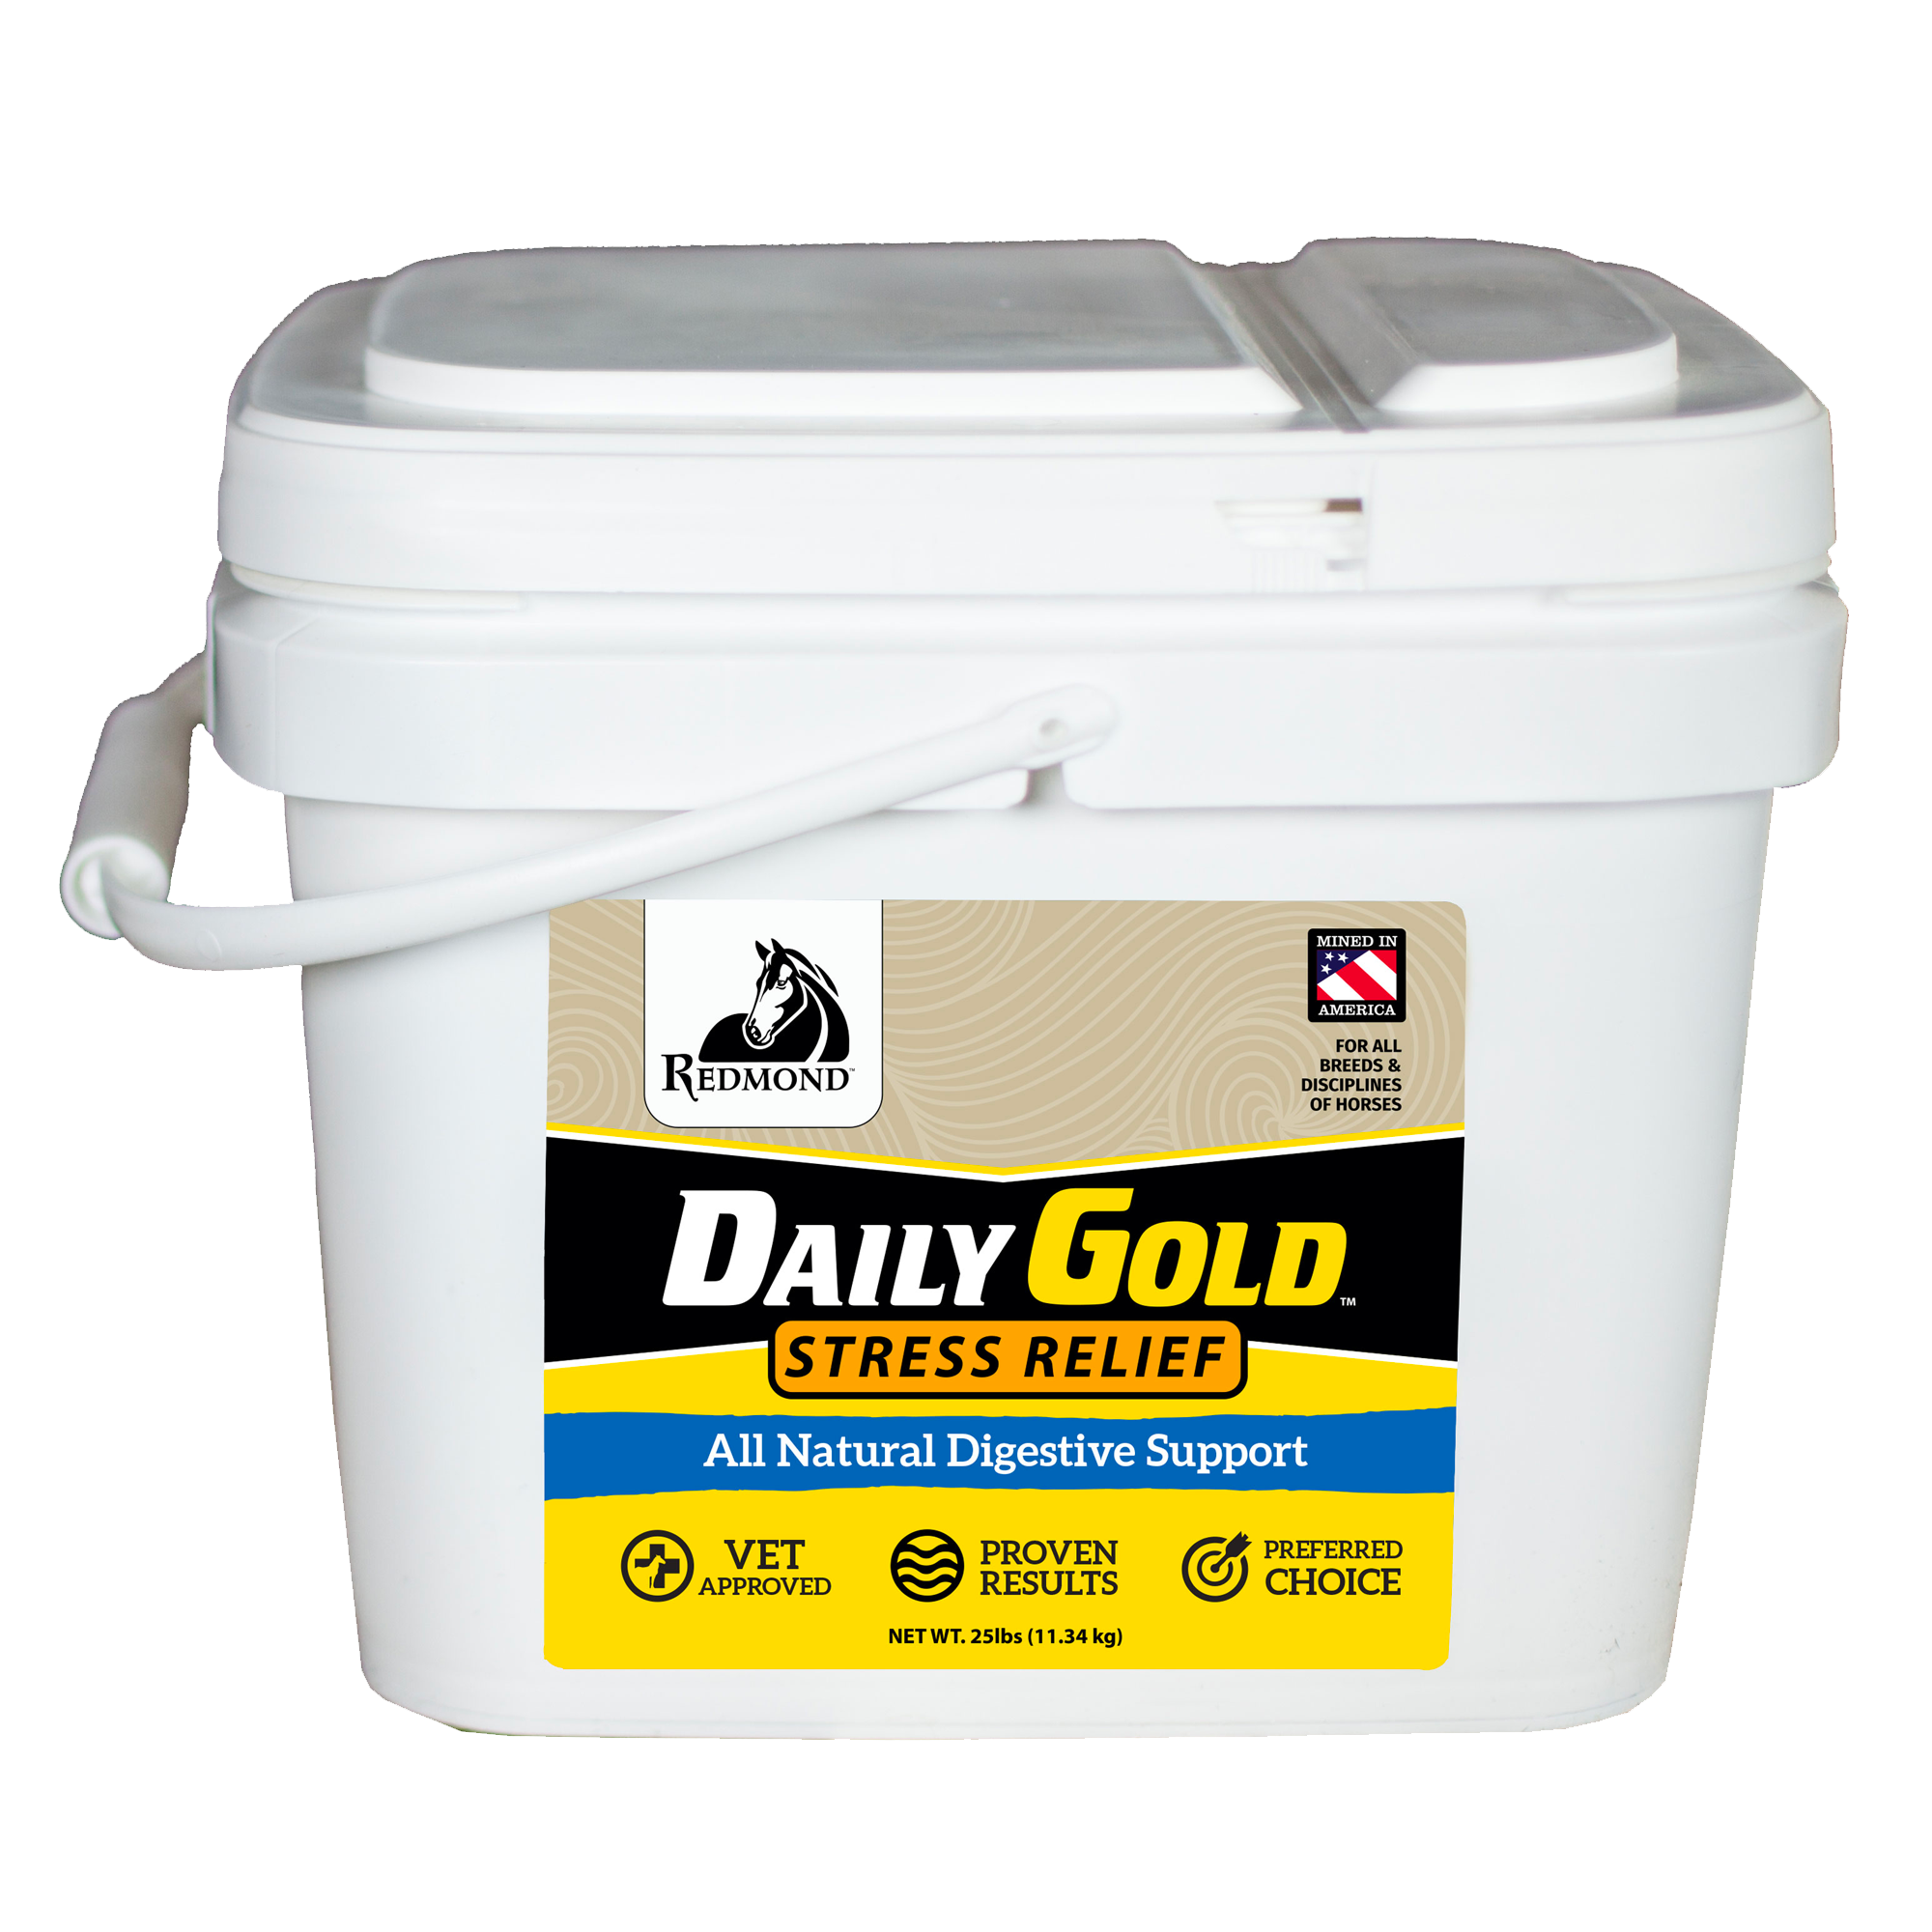 Daily-Gold-25lb-bucket (1)